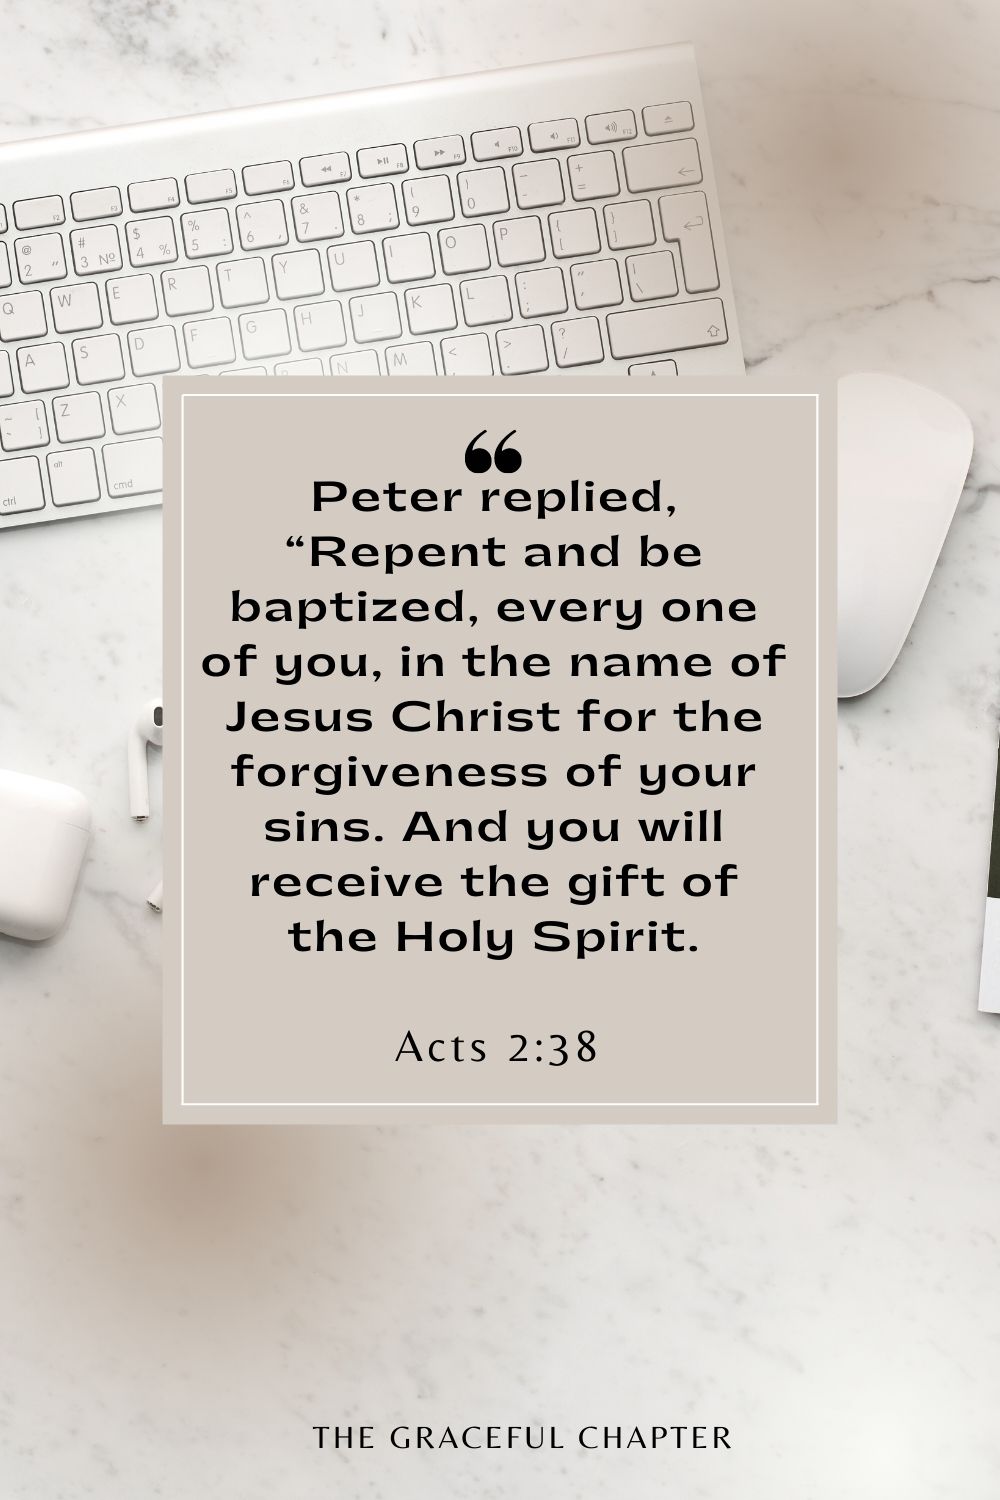 Peter replied, “Repent and be baptized, every one of you, in the name of Jesus Christ for the forgiveness of your sins. And you will receive the gift of the Holy Spirit. Acts 2:38